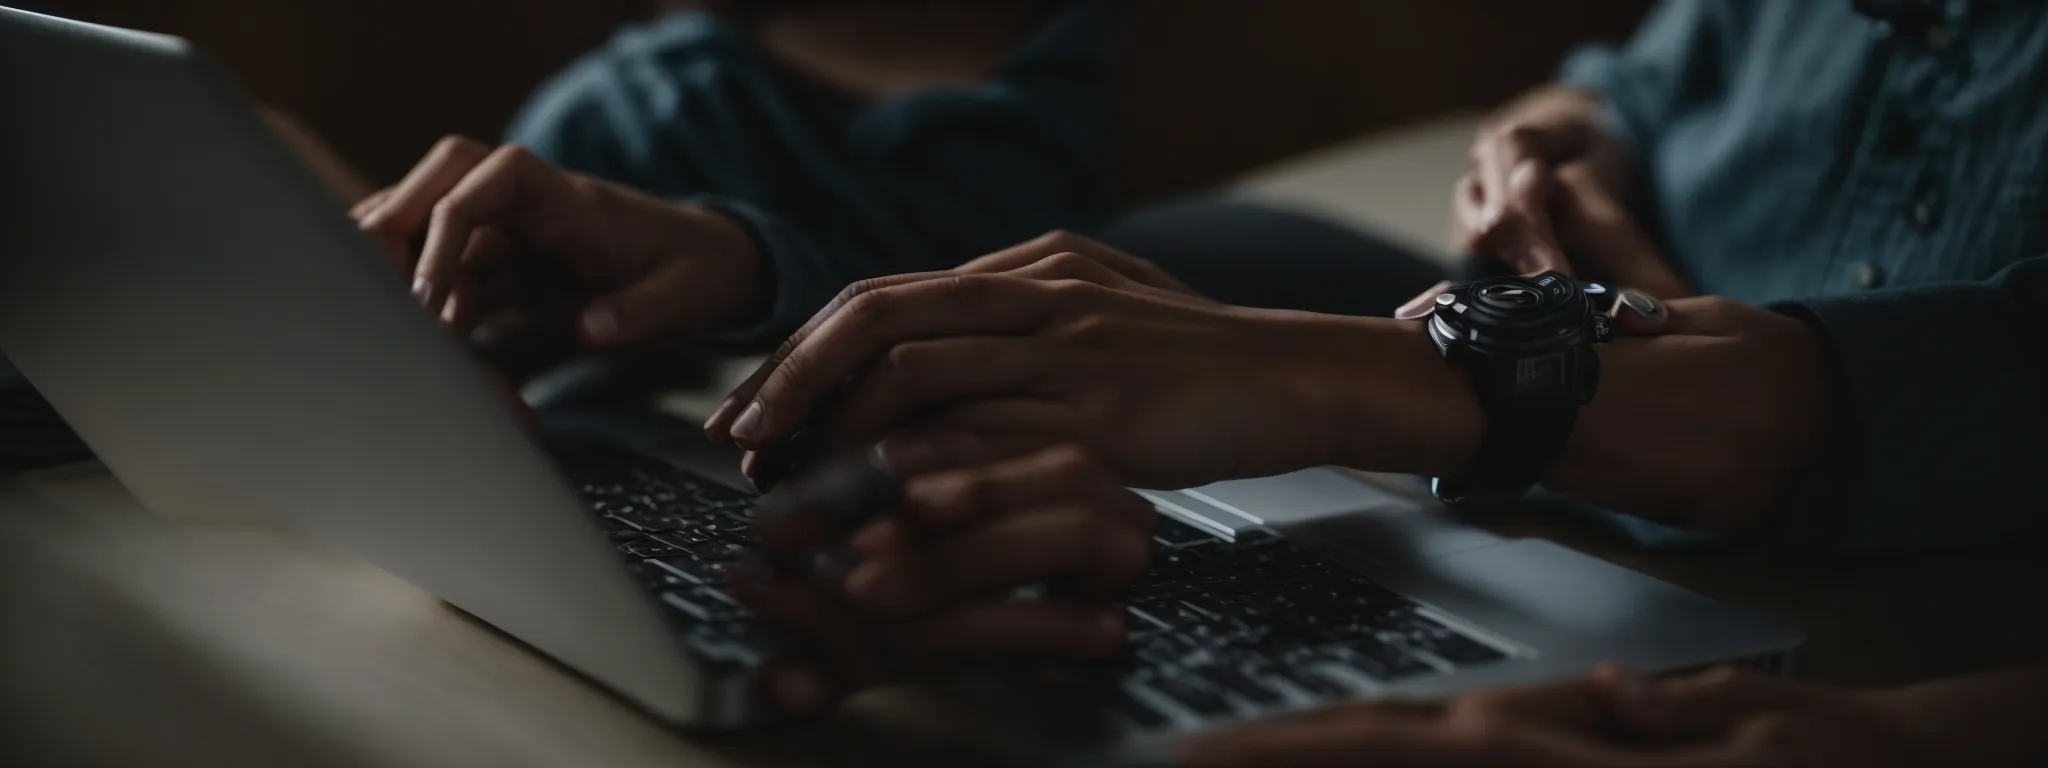 a person typing on a laptop, focusing intently on creating seo-friendly content.